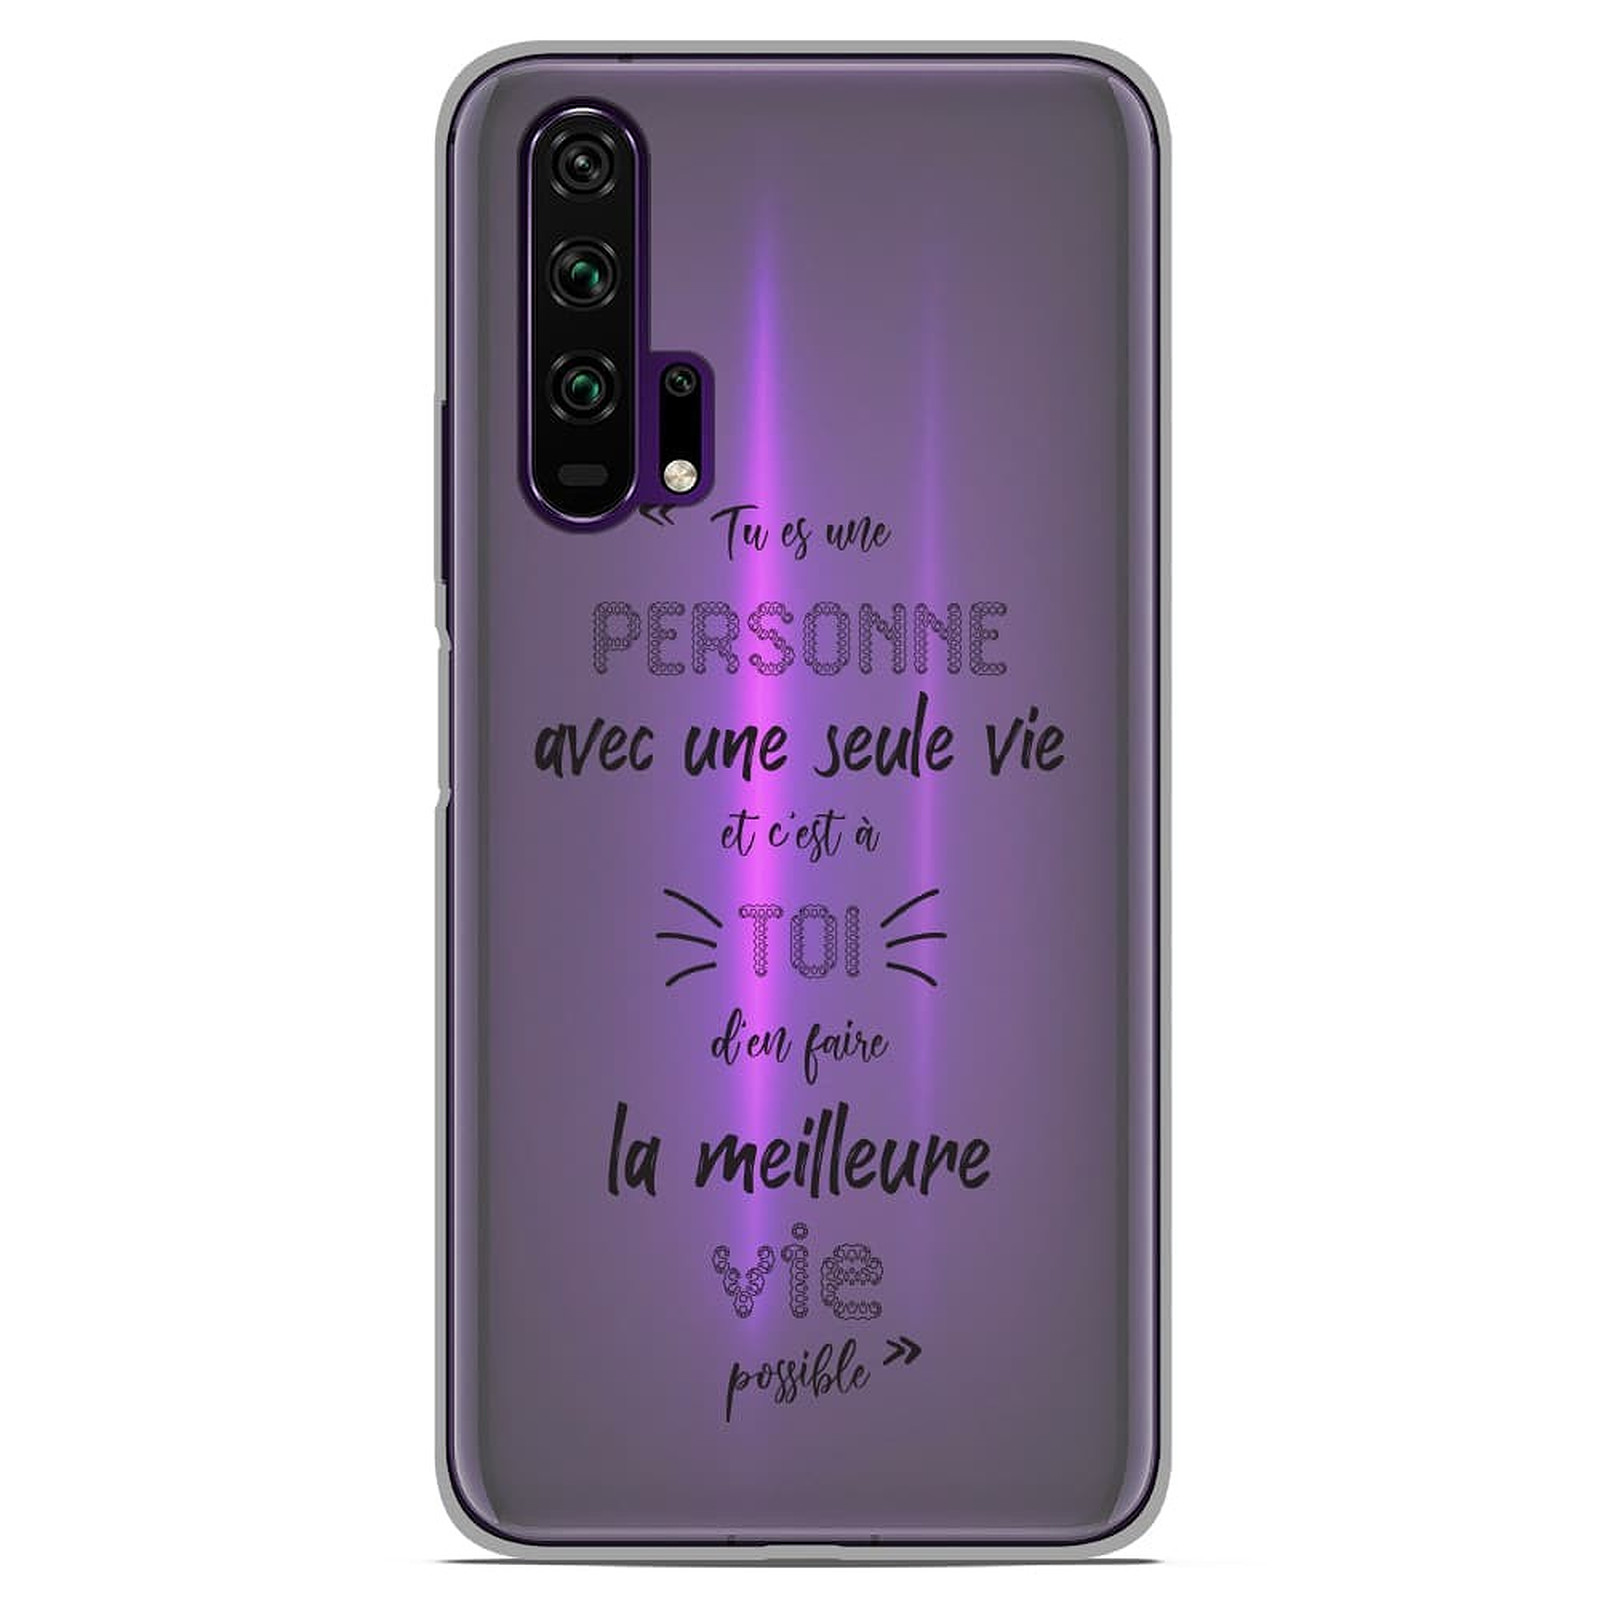 1001 Coques Coque silicone gel Huawei Honor 20 Pro motif Une Seule Vie - Coque telephone 1001Coques